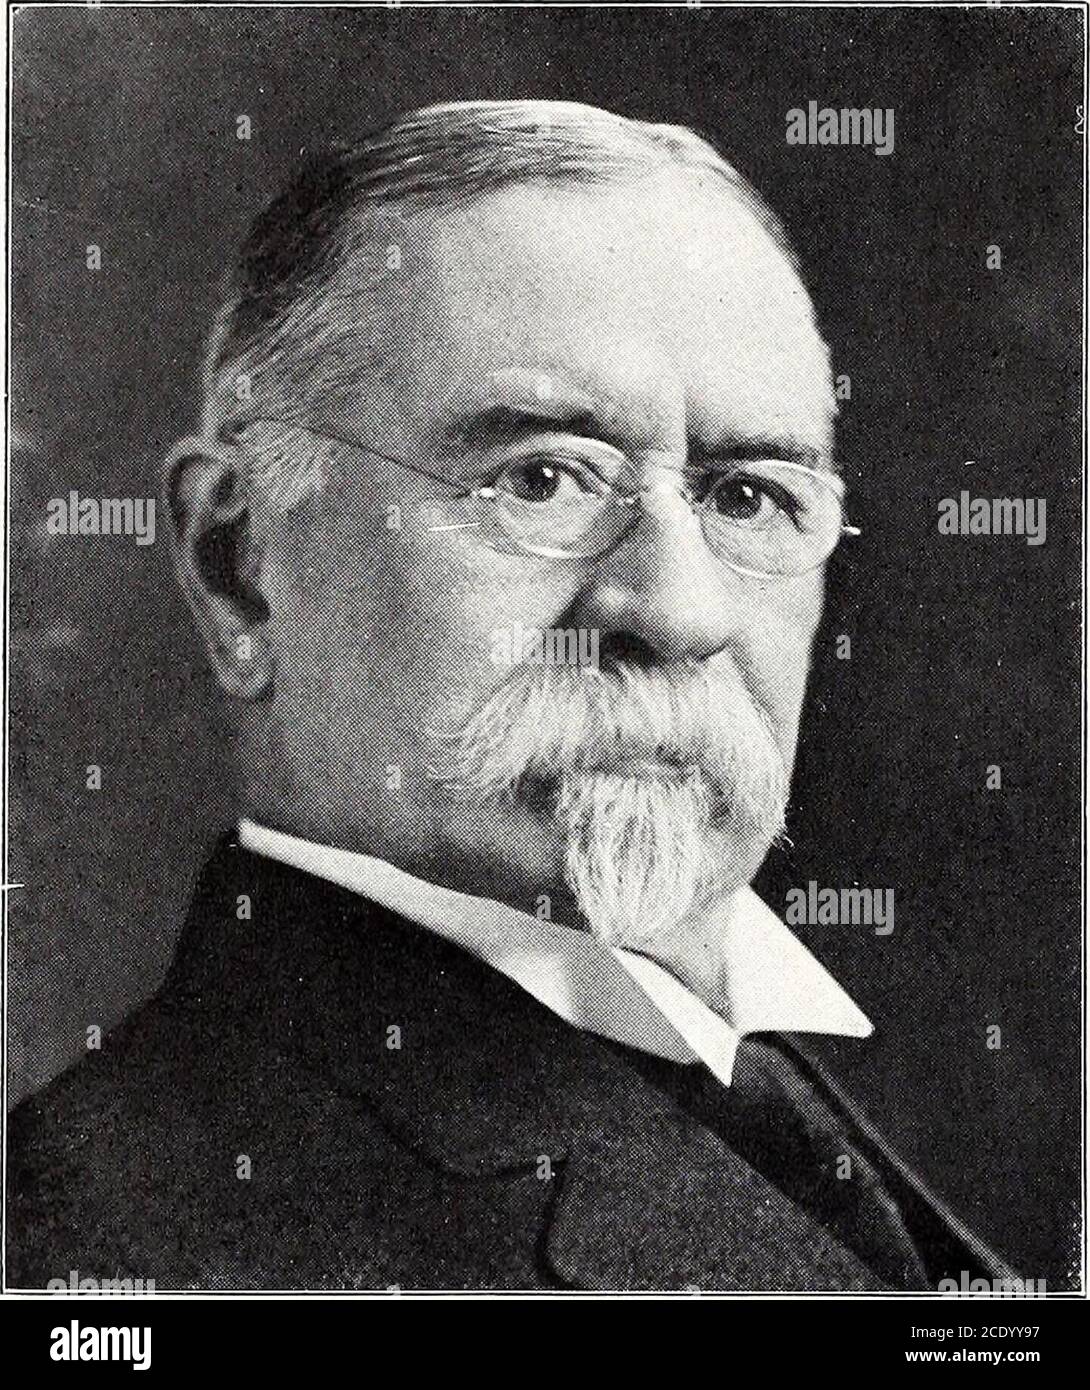 . Notable men of Illinois & their state . of Physicians and Surgeons; mem. Chi. Med. Soc,A. M. A., Chicago Clinical Soc, Physicians Club, Chicago Neuro-logical Soc; repub.; club. Quadrangle; office, 31 N. State St. TINSMAN, HOMER ELLSWORTH, lawyer, Chicago; b. Romeo,Mich., Oct. 21, 1860; s. William H. and Marv .1. (Hosncr) Tinsman;grad. Romeo high schl. 187S: A. B., Univ. of Mich., 1883; adm. to HI.bar, 188.5; began practice Burke & Hollett, Dec, 1886: mem. firmof Burke, Hollett & Tinsman, 1887; 1893 firm became Hollett &Tinsman, and later, Hollett, Tinsman & Sauter; dissolved, 1905,and presen Stock Photo